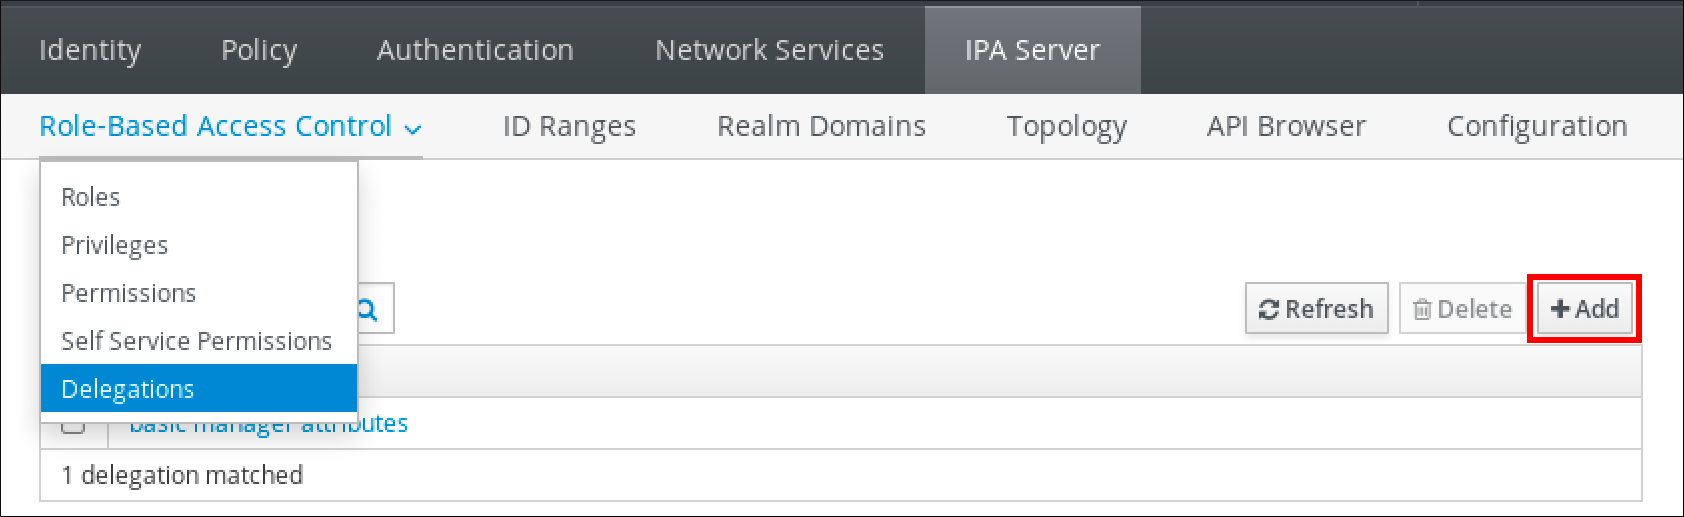 A screenshot of the IdM Web UI displaying contents of the "Role-Based Access Control" drop-down sub-menu from the "IPA Server" tab. There are five options in the "Role-Based Access Control" drop-down menu: Roles - Privileges - Permissions - Self Service Permissions - Delegations.